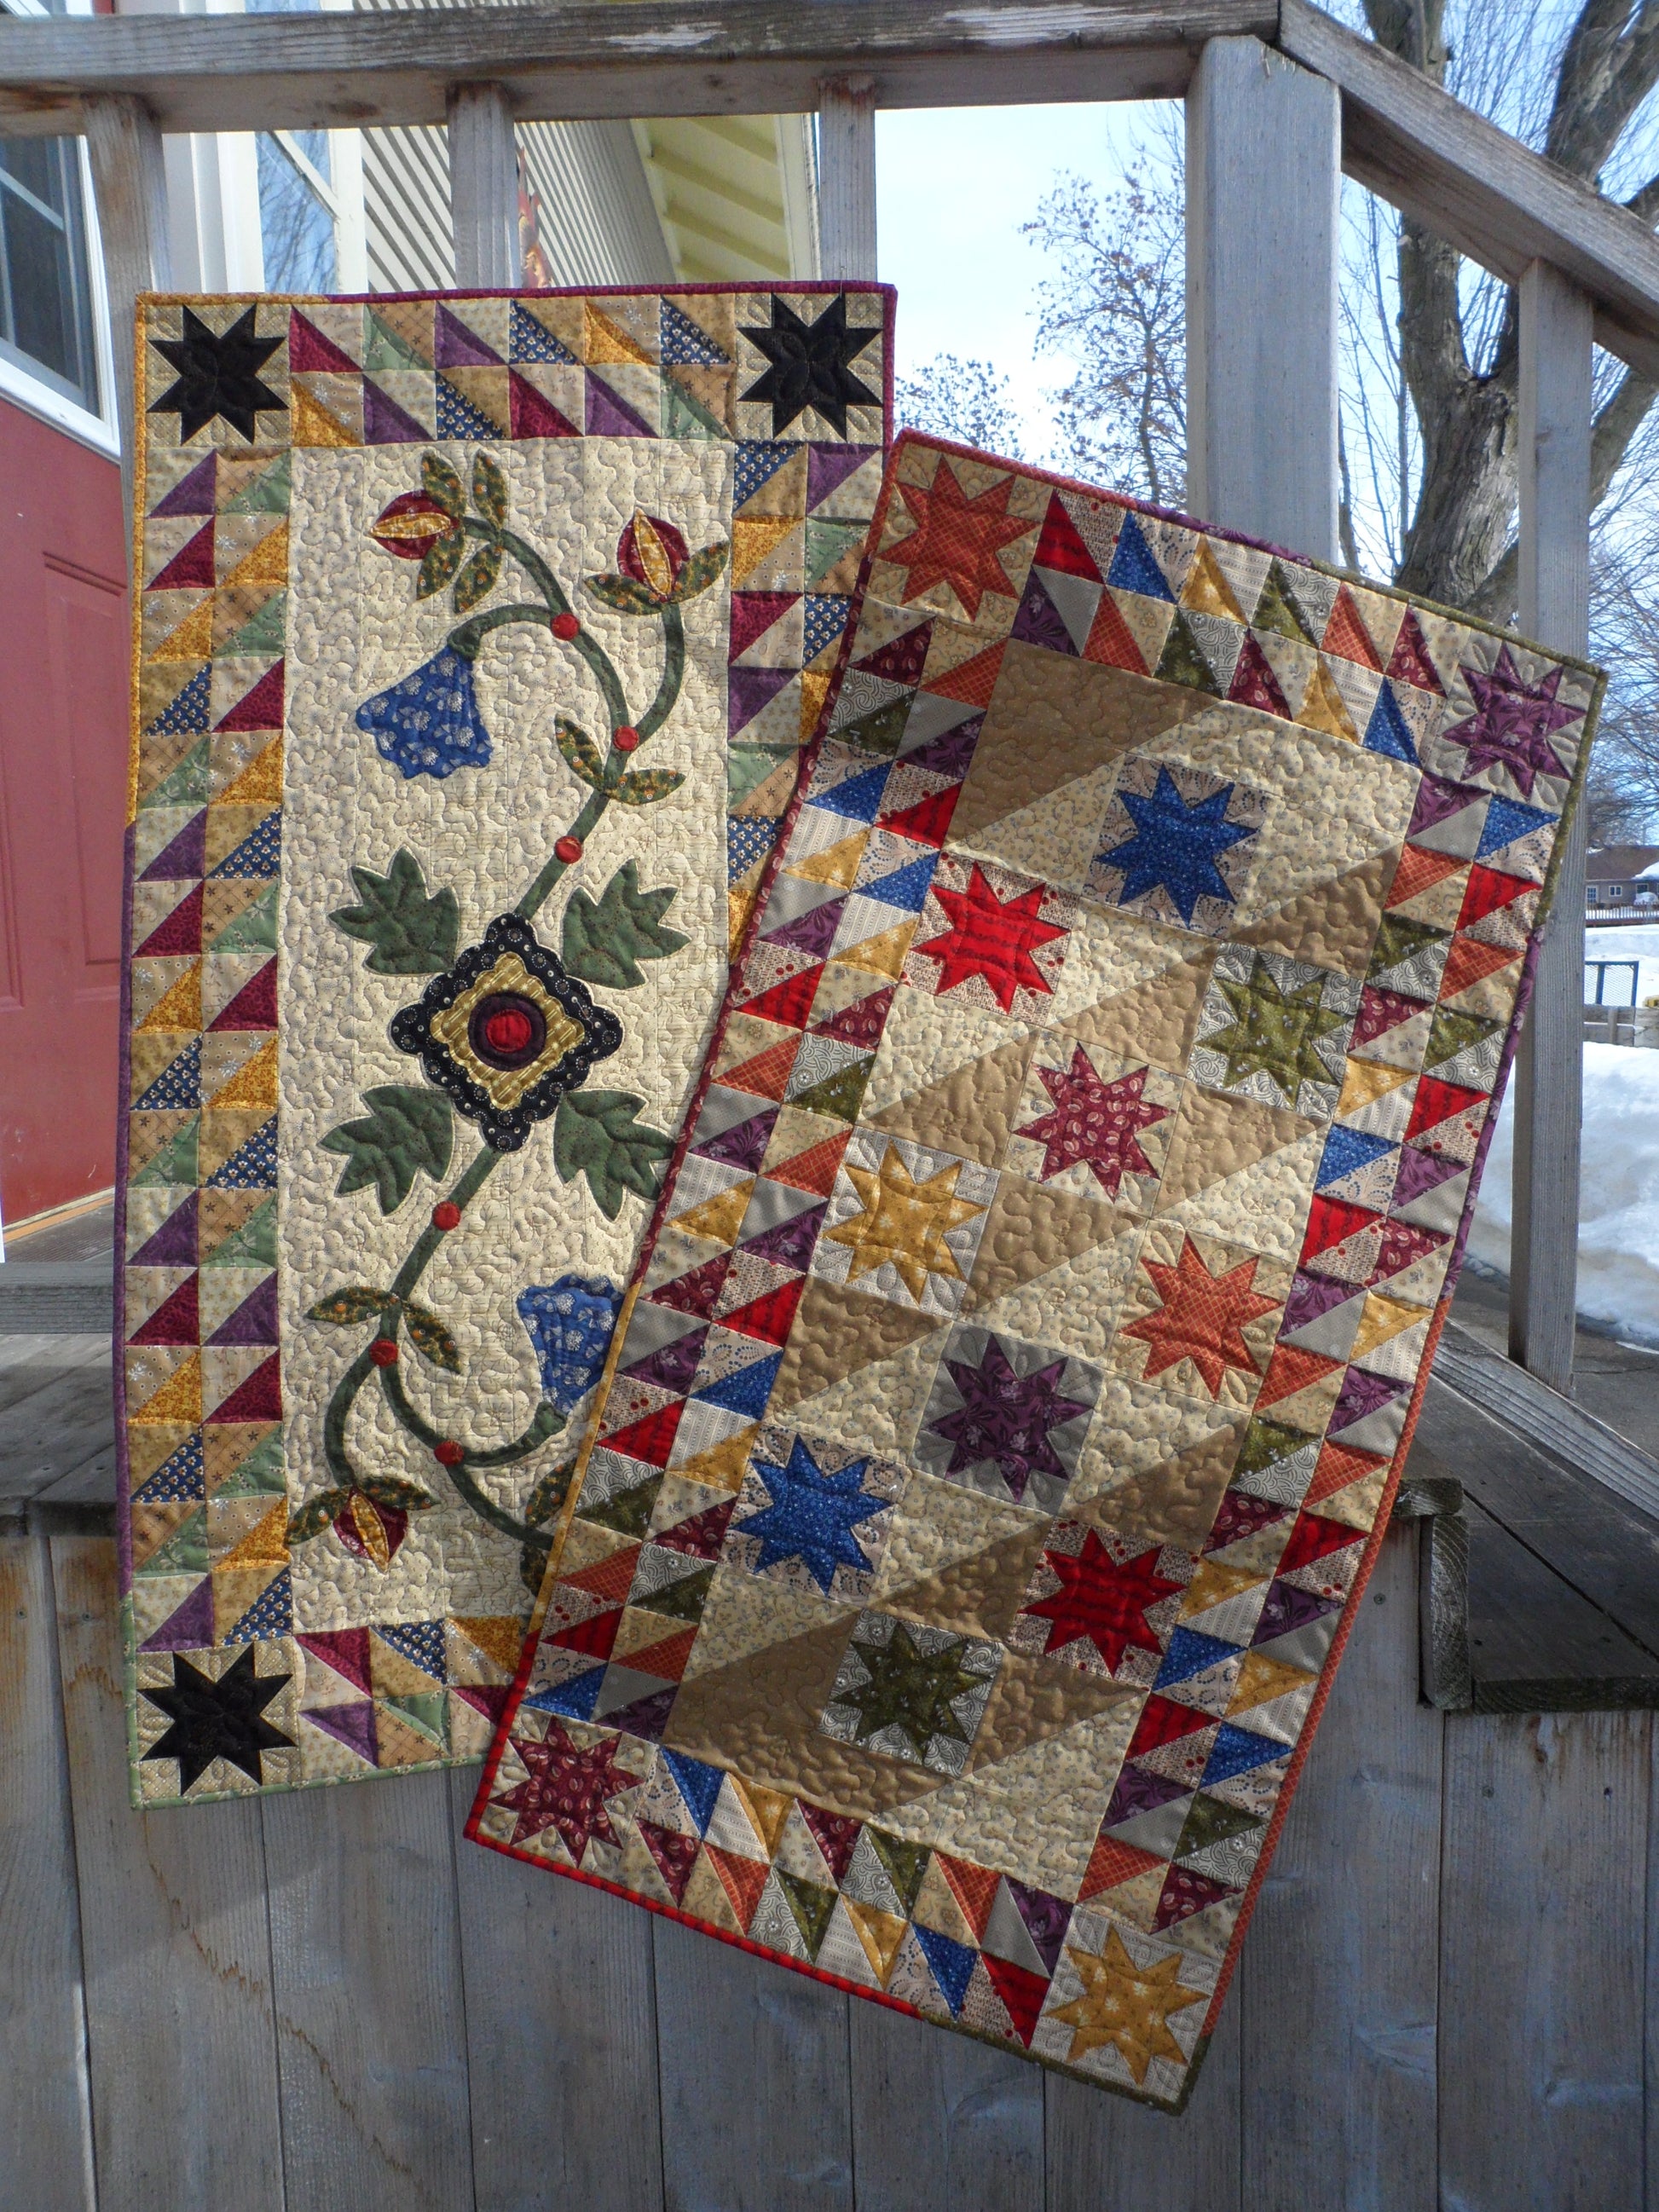 scrappy table runner quilt patterns 